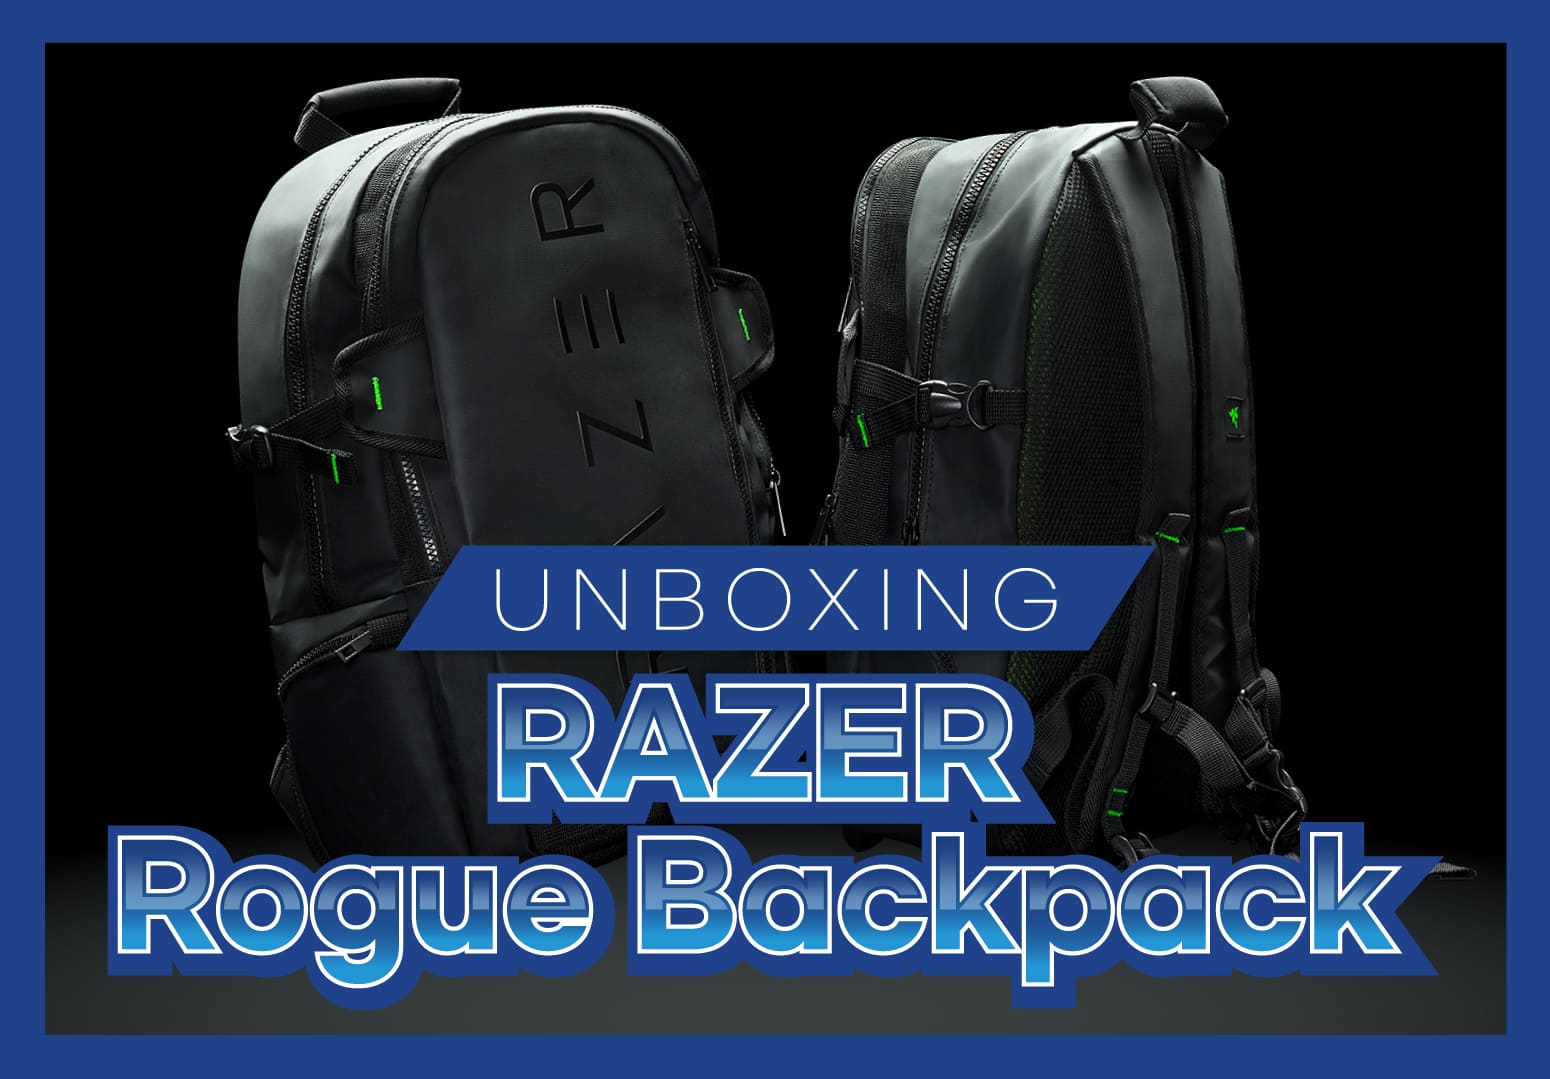 RAZER Rogue Backpack 썸네일